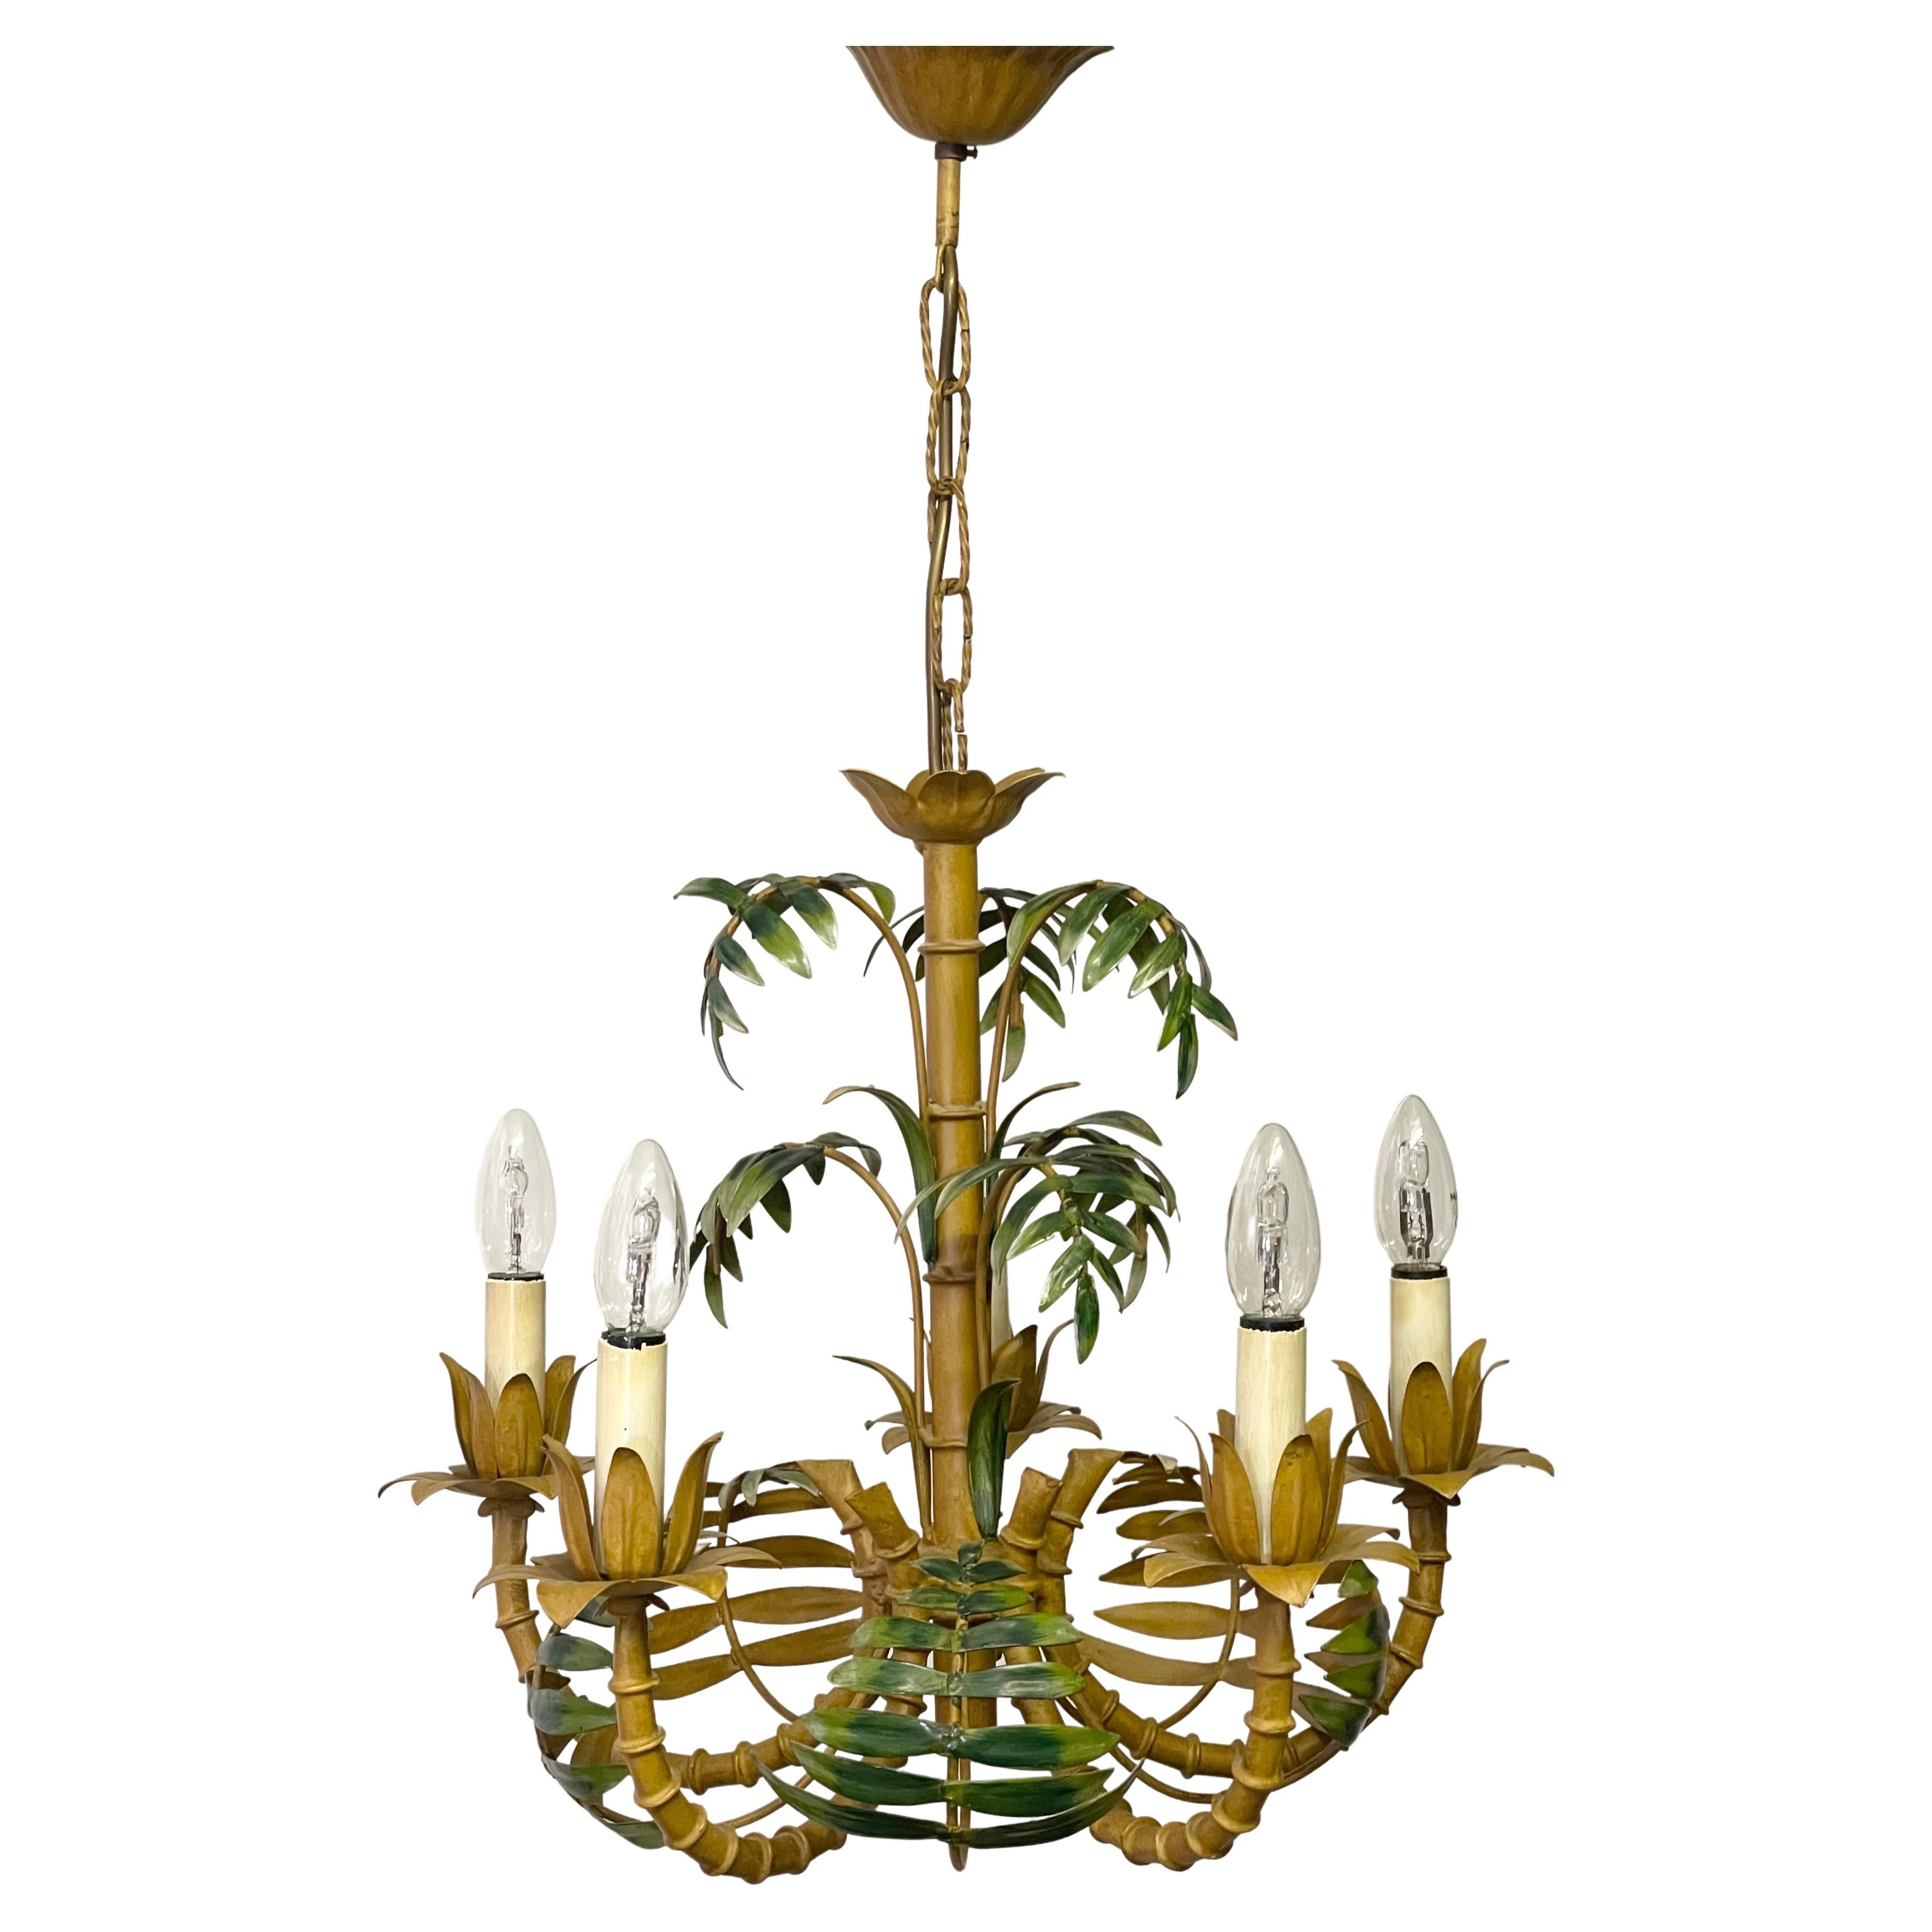 Mid-century French faux bamboo tole palm tree chandelier, circa 1950s.
This beautiful chandelier is made of patinated metal in brown and green colour.
In an very good condition.
Socket: 5 x E 14 for standard screw bulbs.